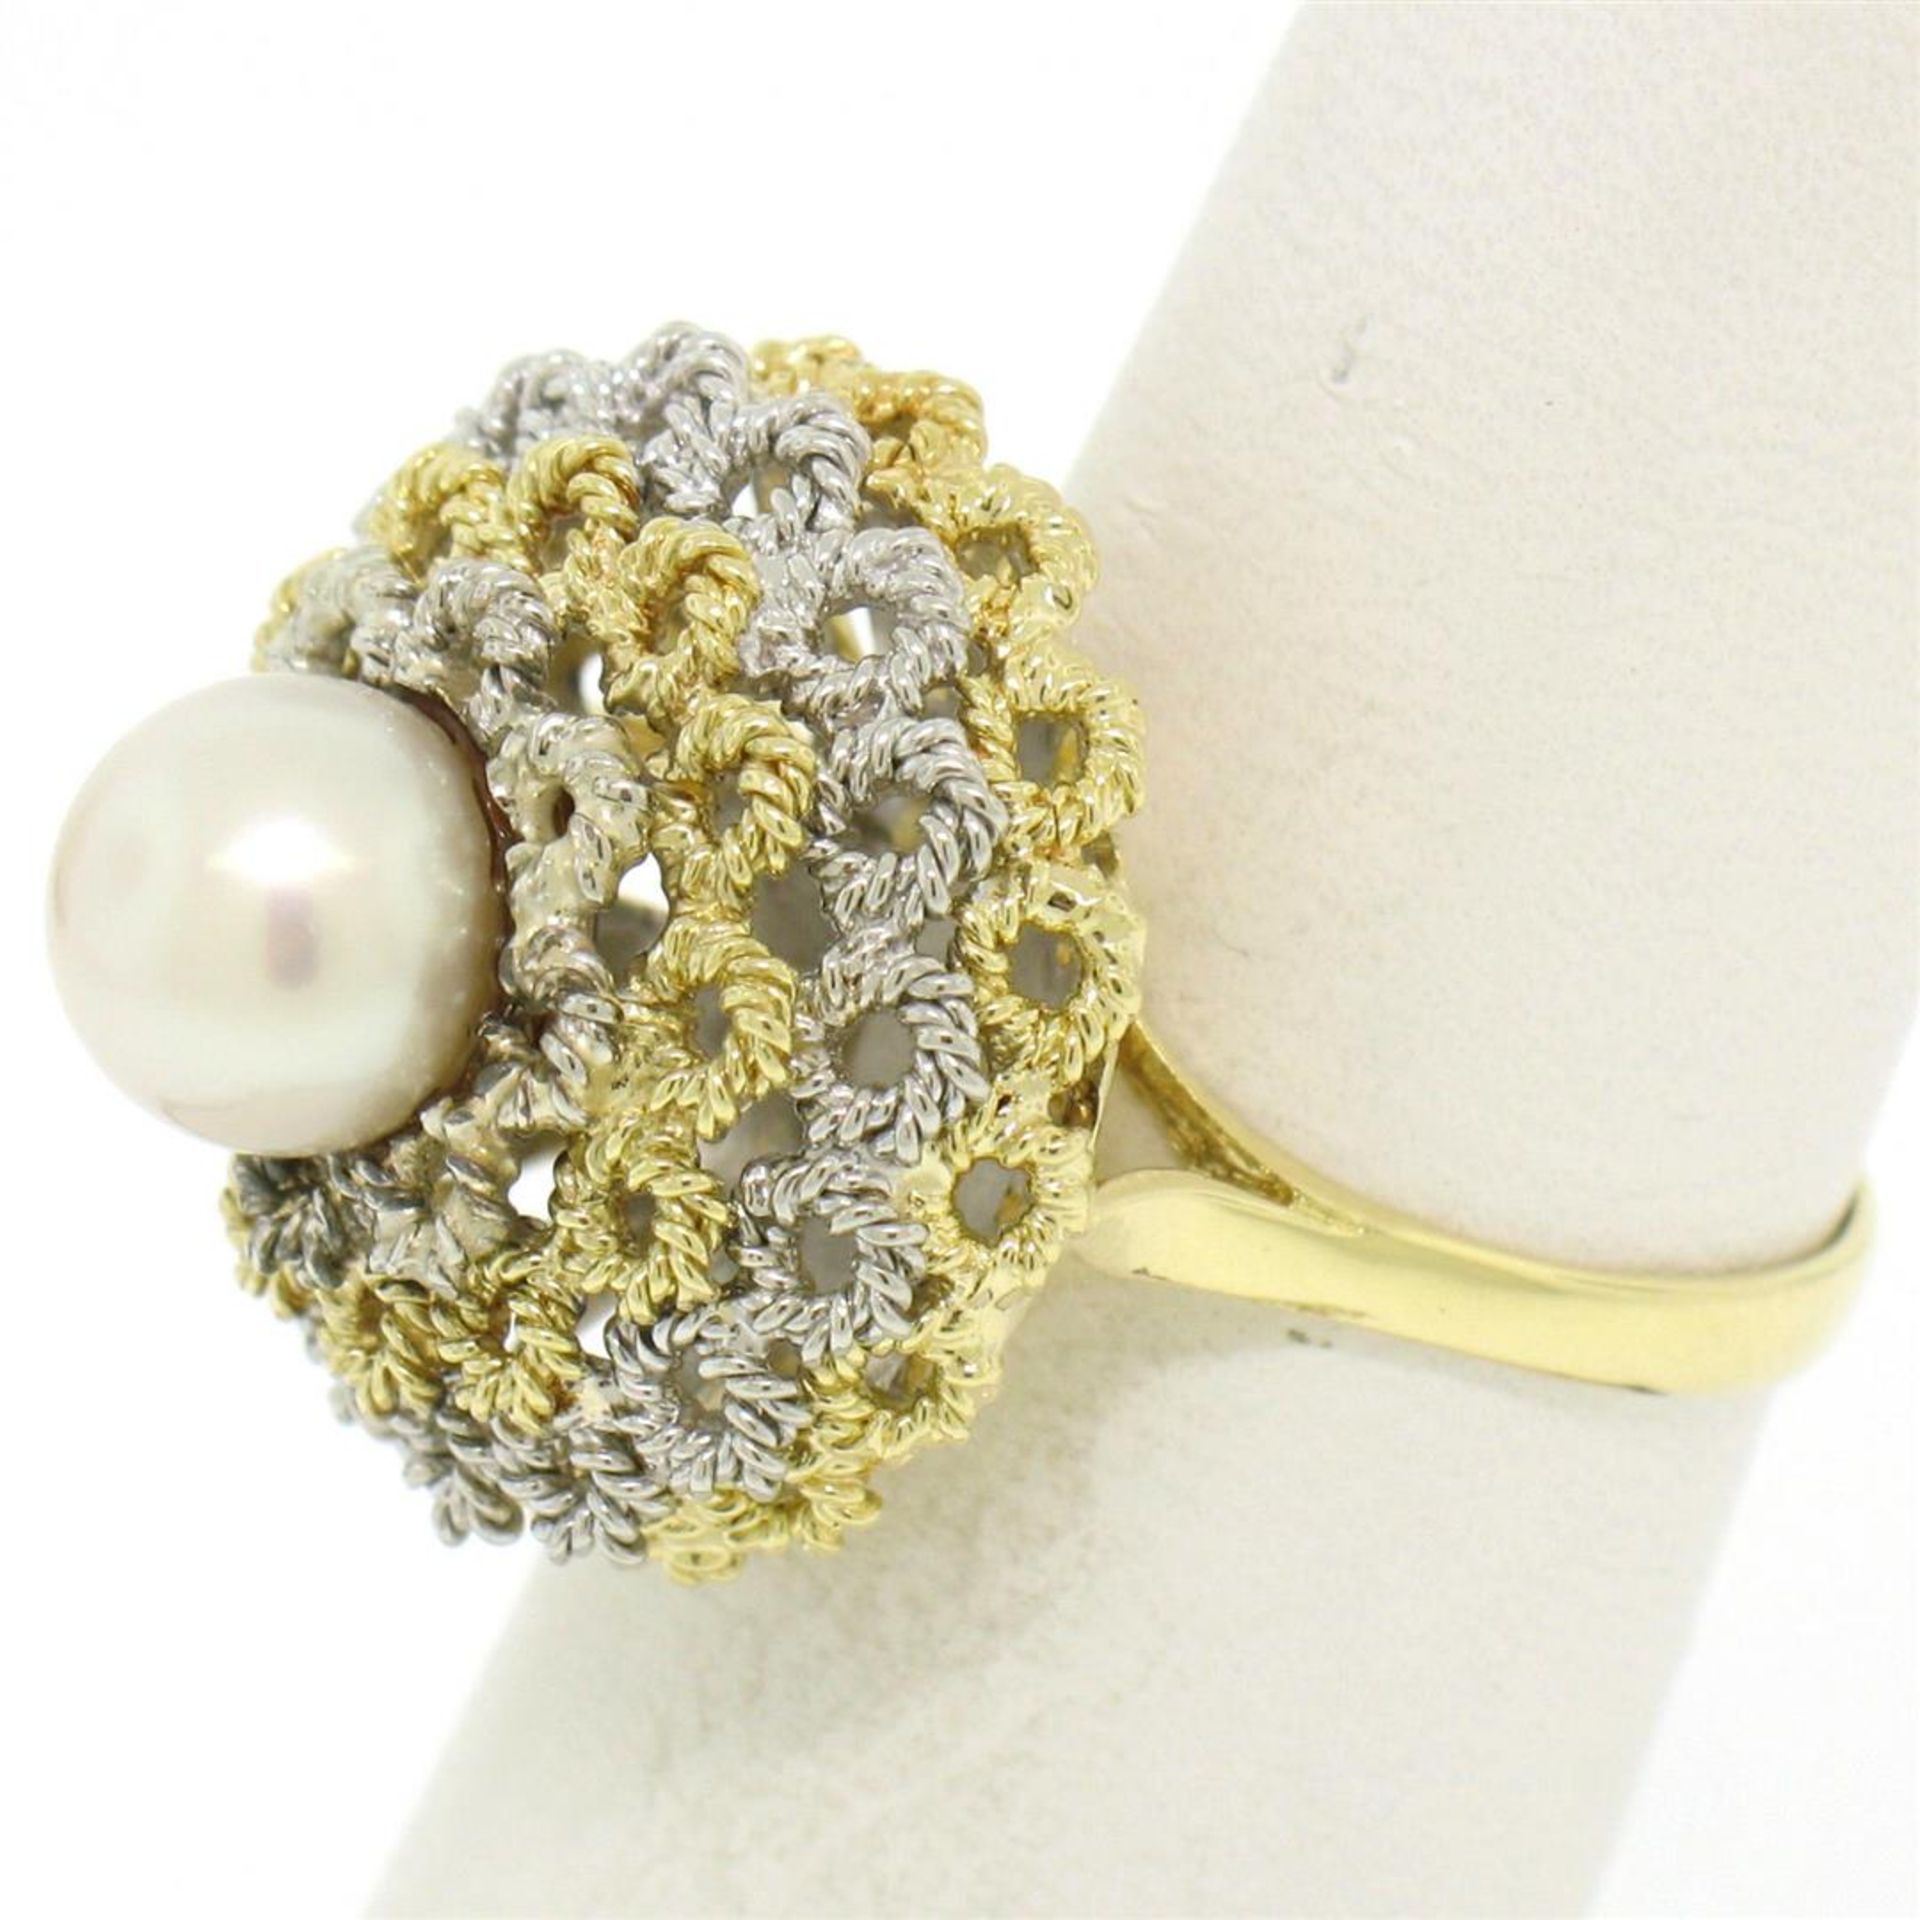 Handmade 18kt Yellow and White Gold Akoya Pearl Cocktail Ring - Image 2 of 7